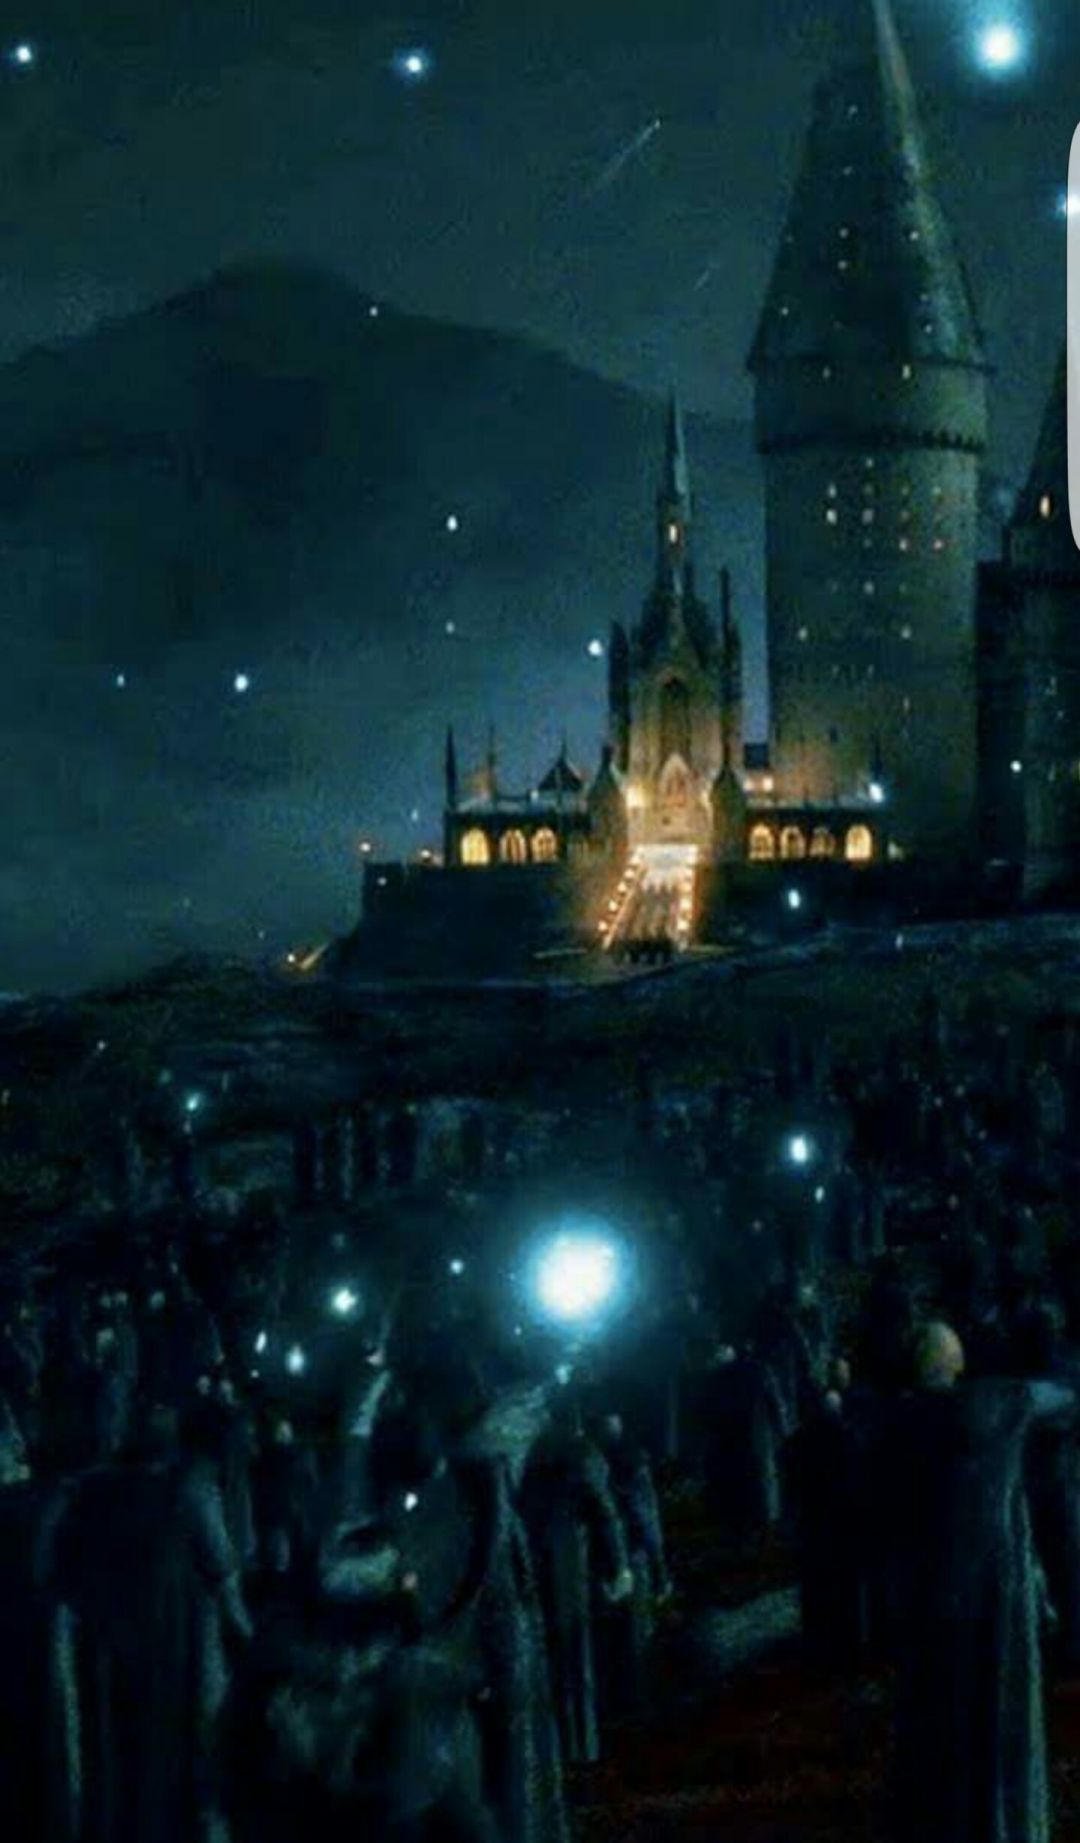 4k cinema] The deathly hallows - Wallpapers and art - Mine-imator forums